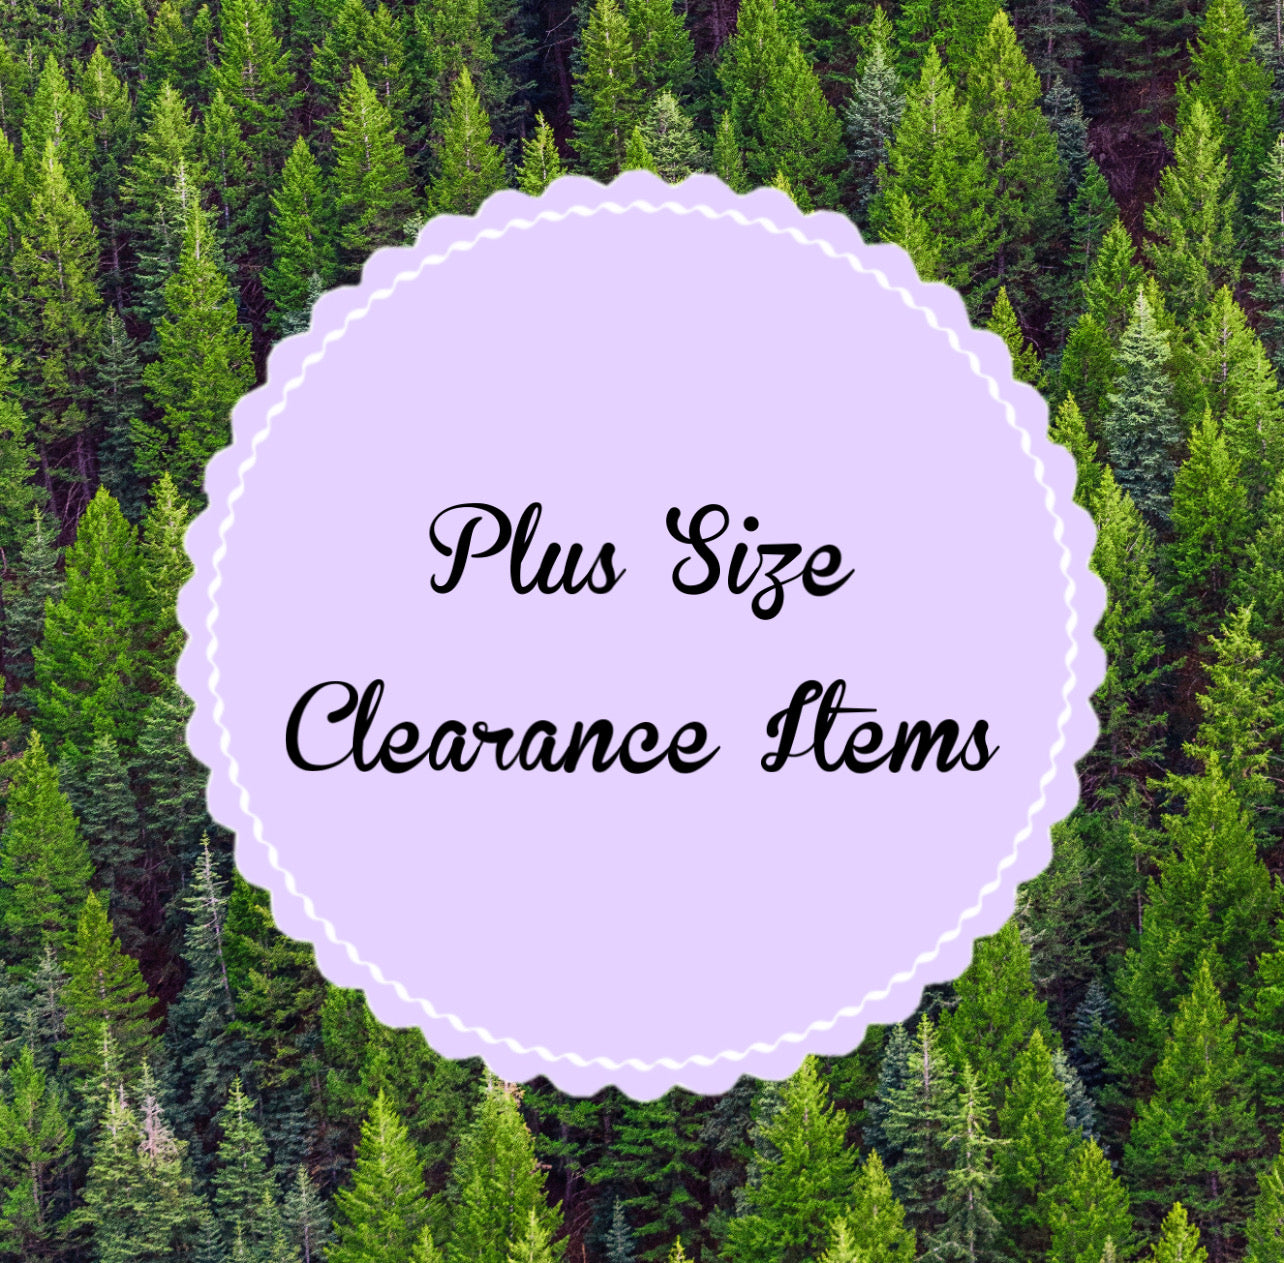 Plus Size Clearance Items